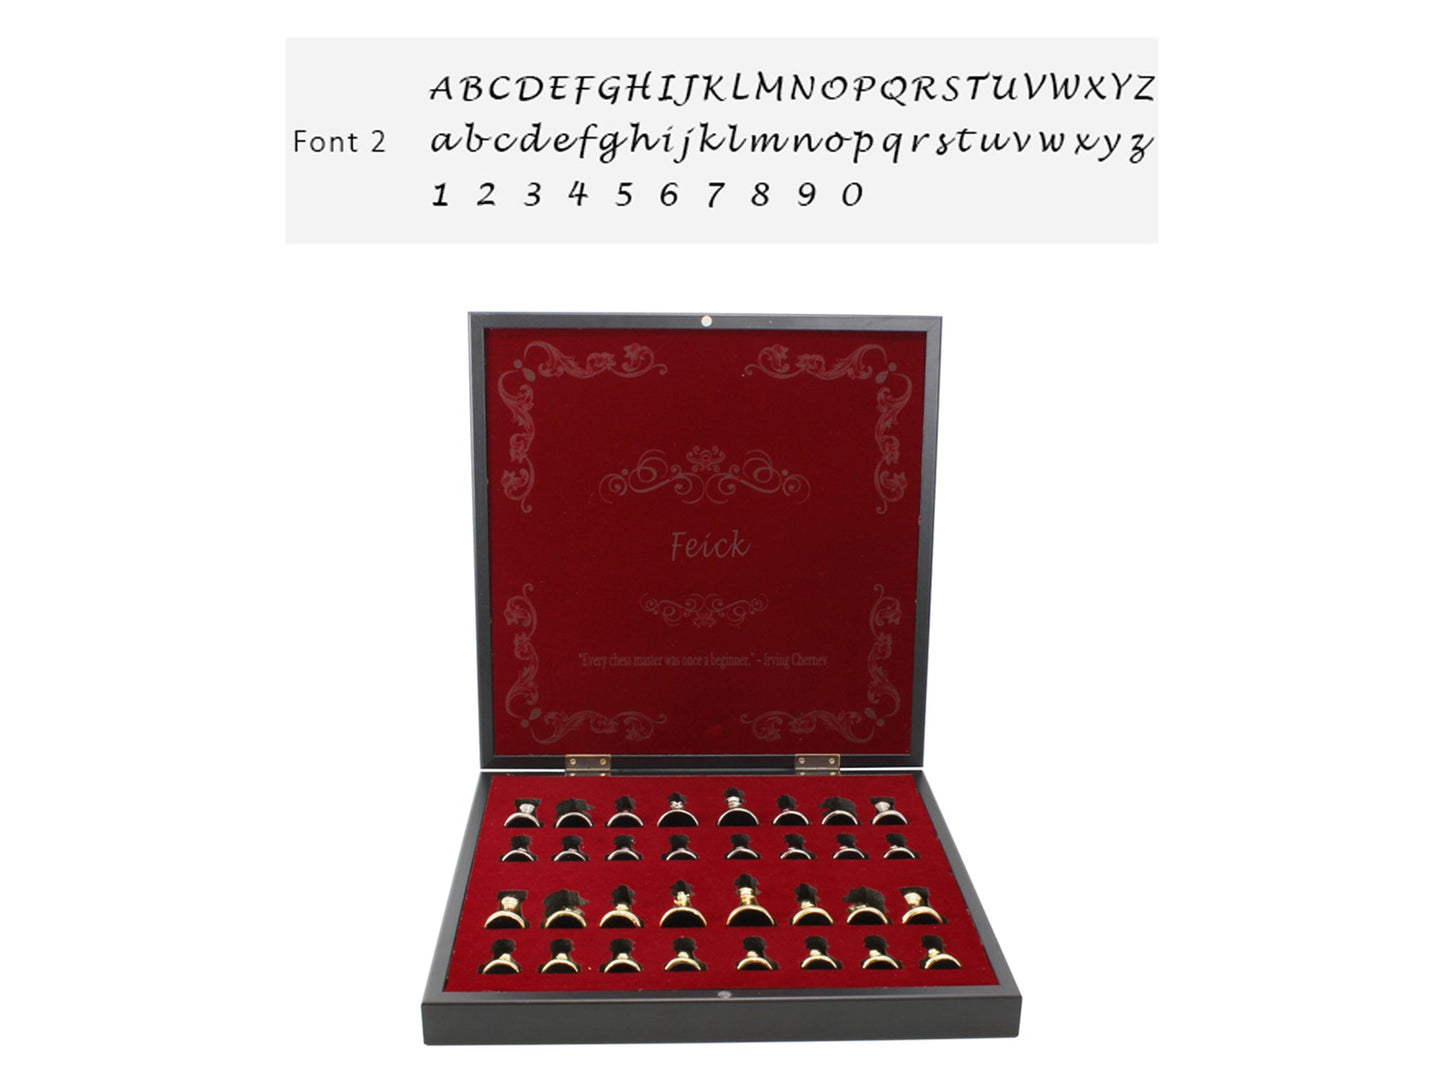 Customized Chess Set with Font 2